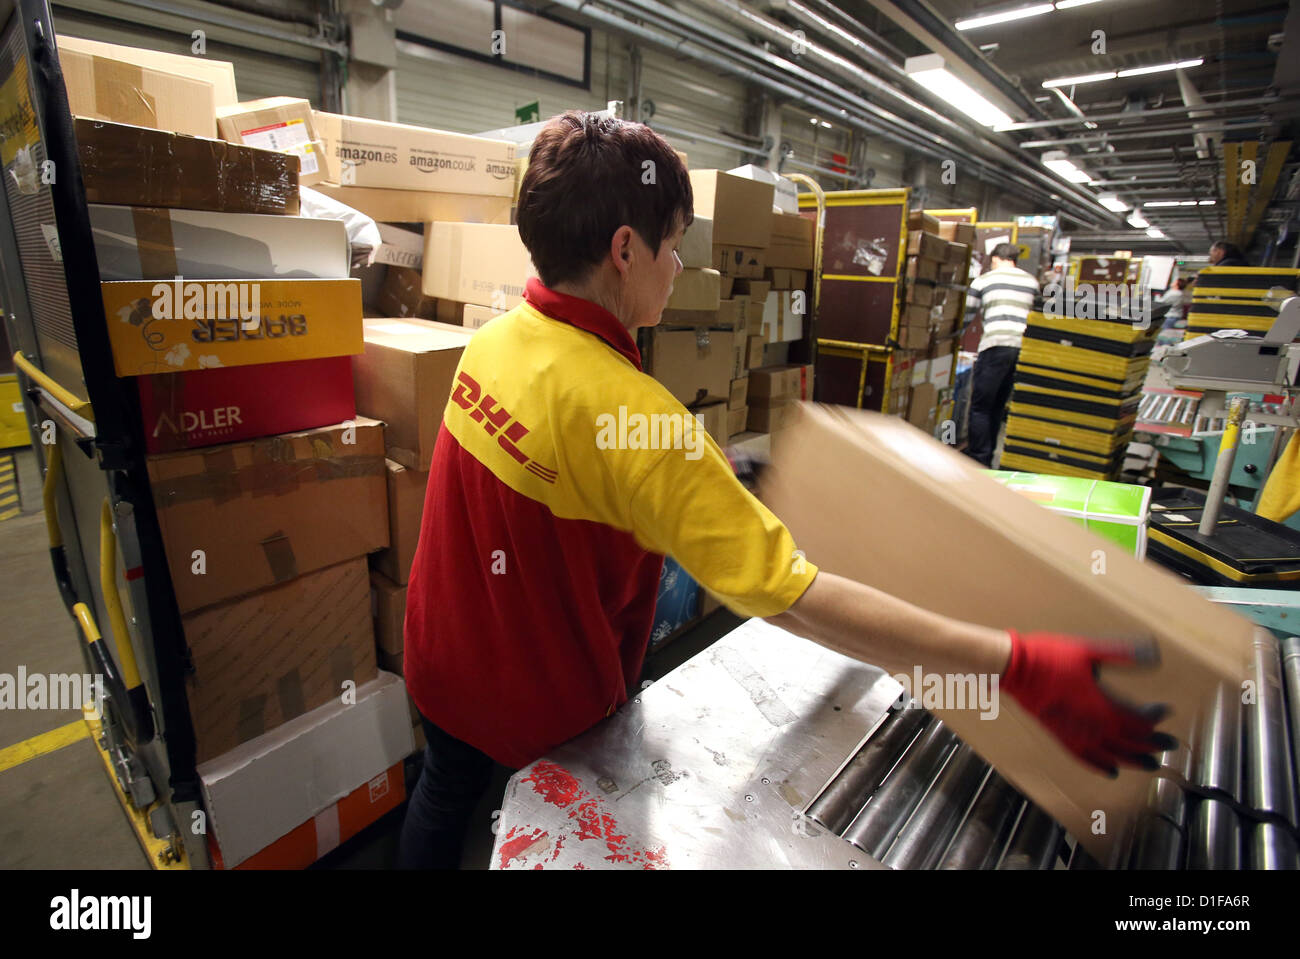 Karin Simon puts packages on the conveyor belt at the parcel sorting center of Deutsche Post DHL in Neustrelitz, Germany, 17 December 2012. Up to 20,000 parcels are sorted in an hour. Since November, the traffic doubled, and six million packages are sorted in total. Nationwide, Deutsche Post DHL expects a record in the number of packages delivered in the Christmas period. Photo: Bernd Wüstneck Stock Photo